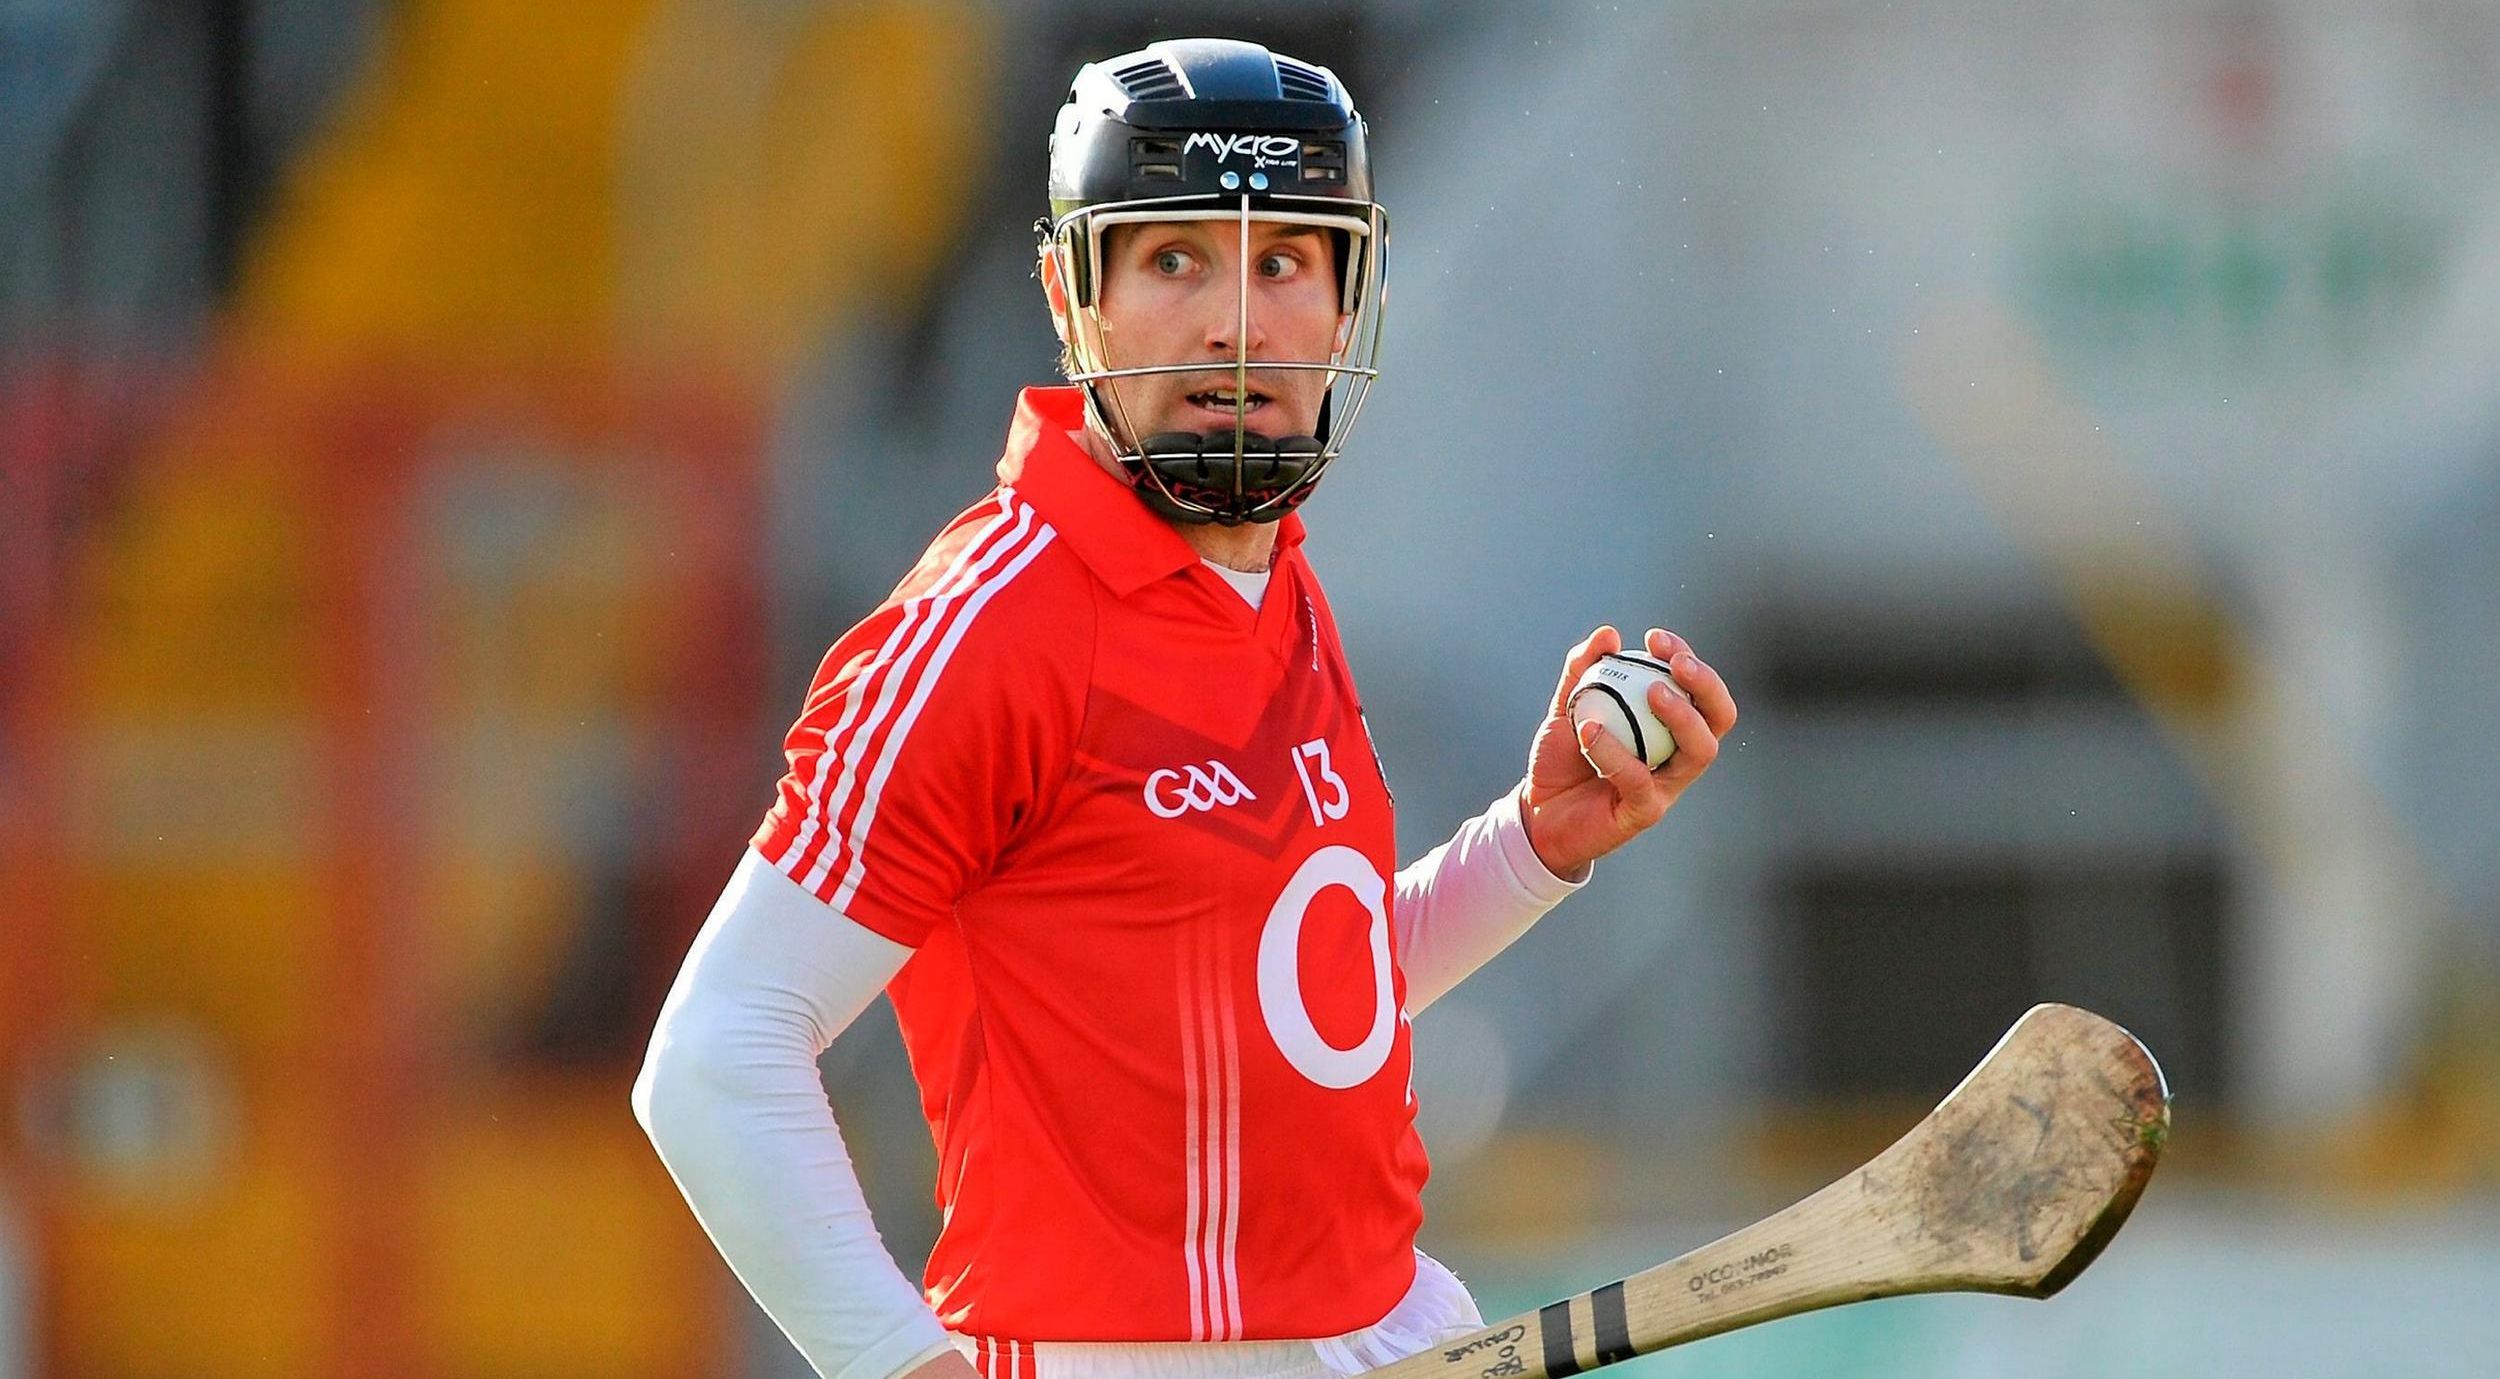 Cork U-20 star Ben O'Connor has turned away from hurling as he chooses to  embark on a career in rugby